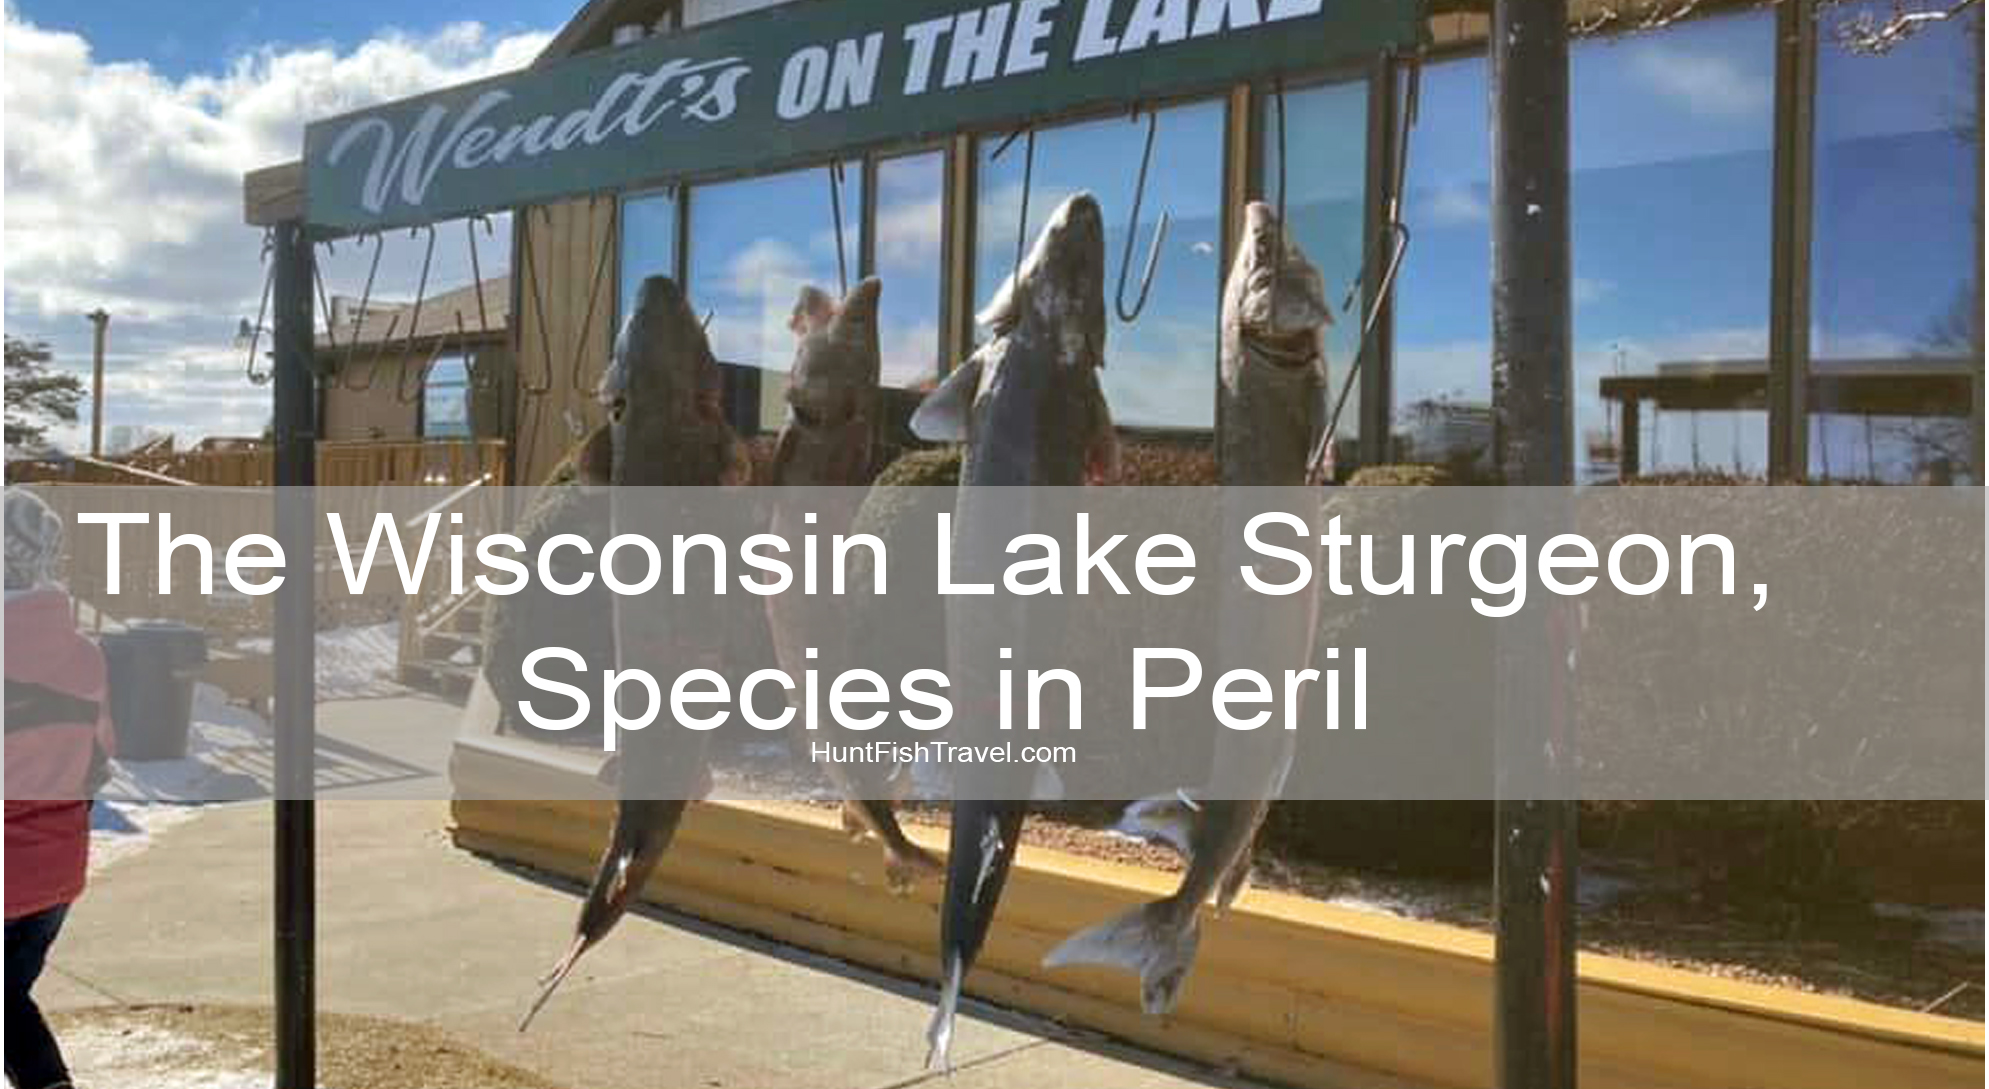 The Wisconsin Lake Sturgeon, a Species in Peril?